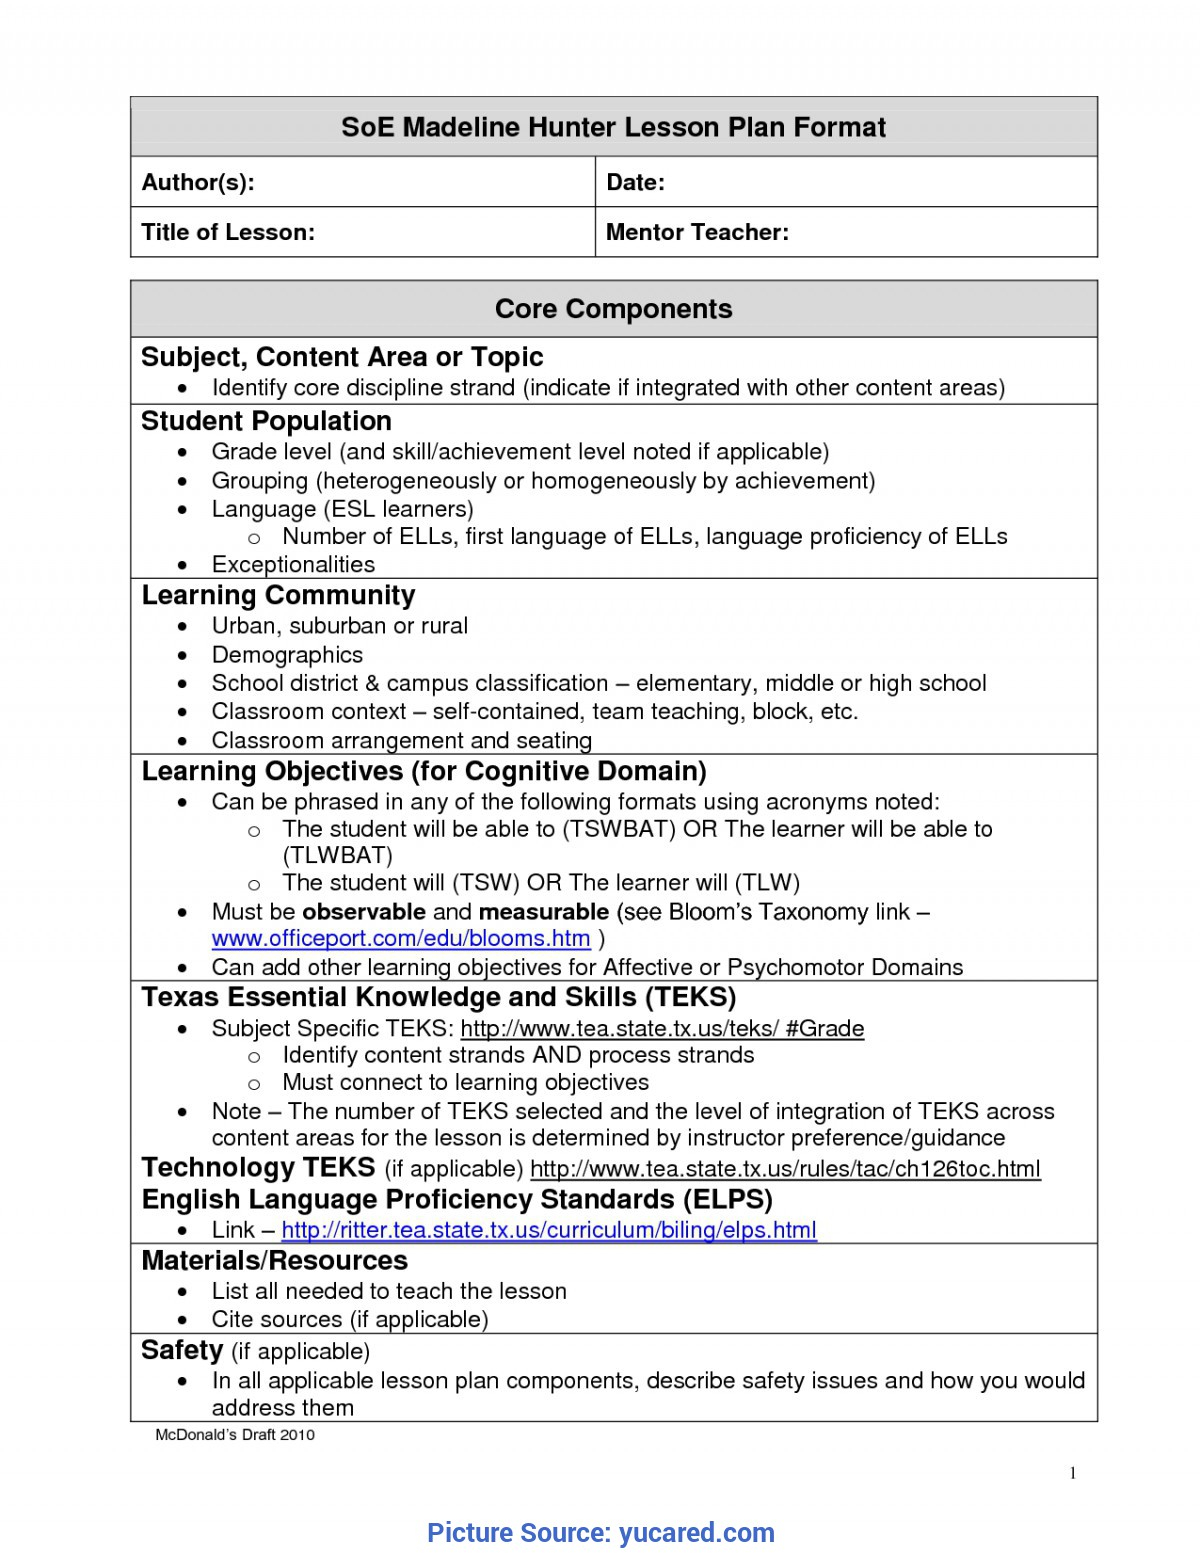 Madeline Hunter Lesson Plan Template Word | Articleezined In Madeline Hunter Lesson Plan Blank Template